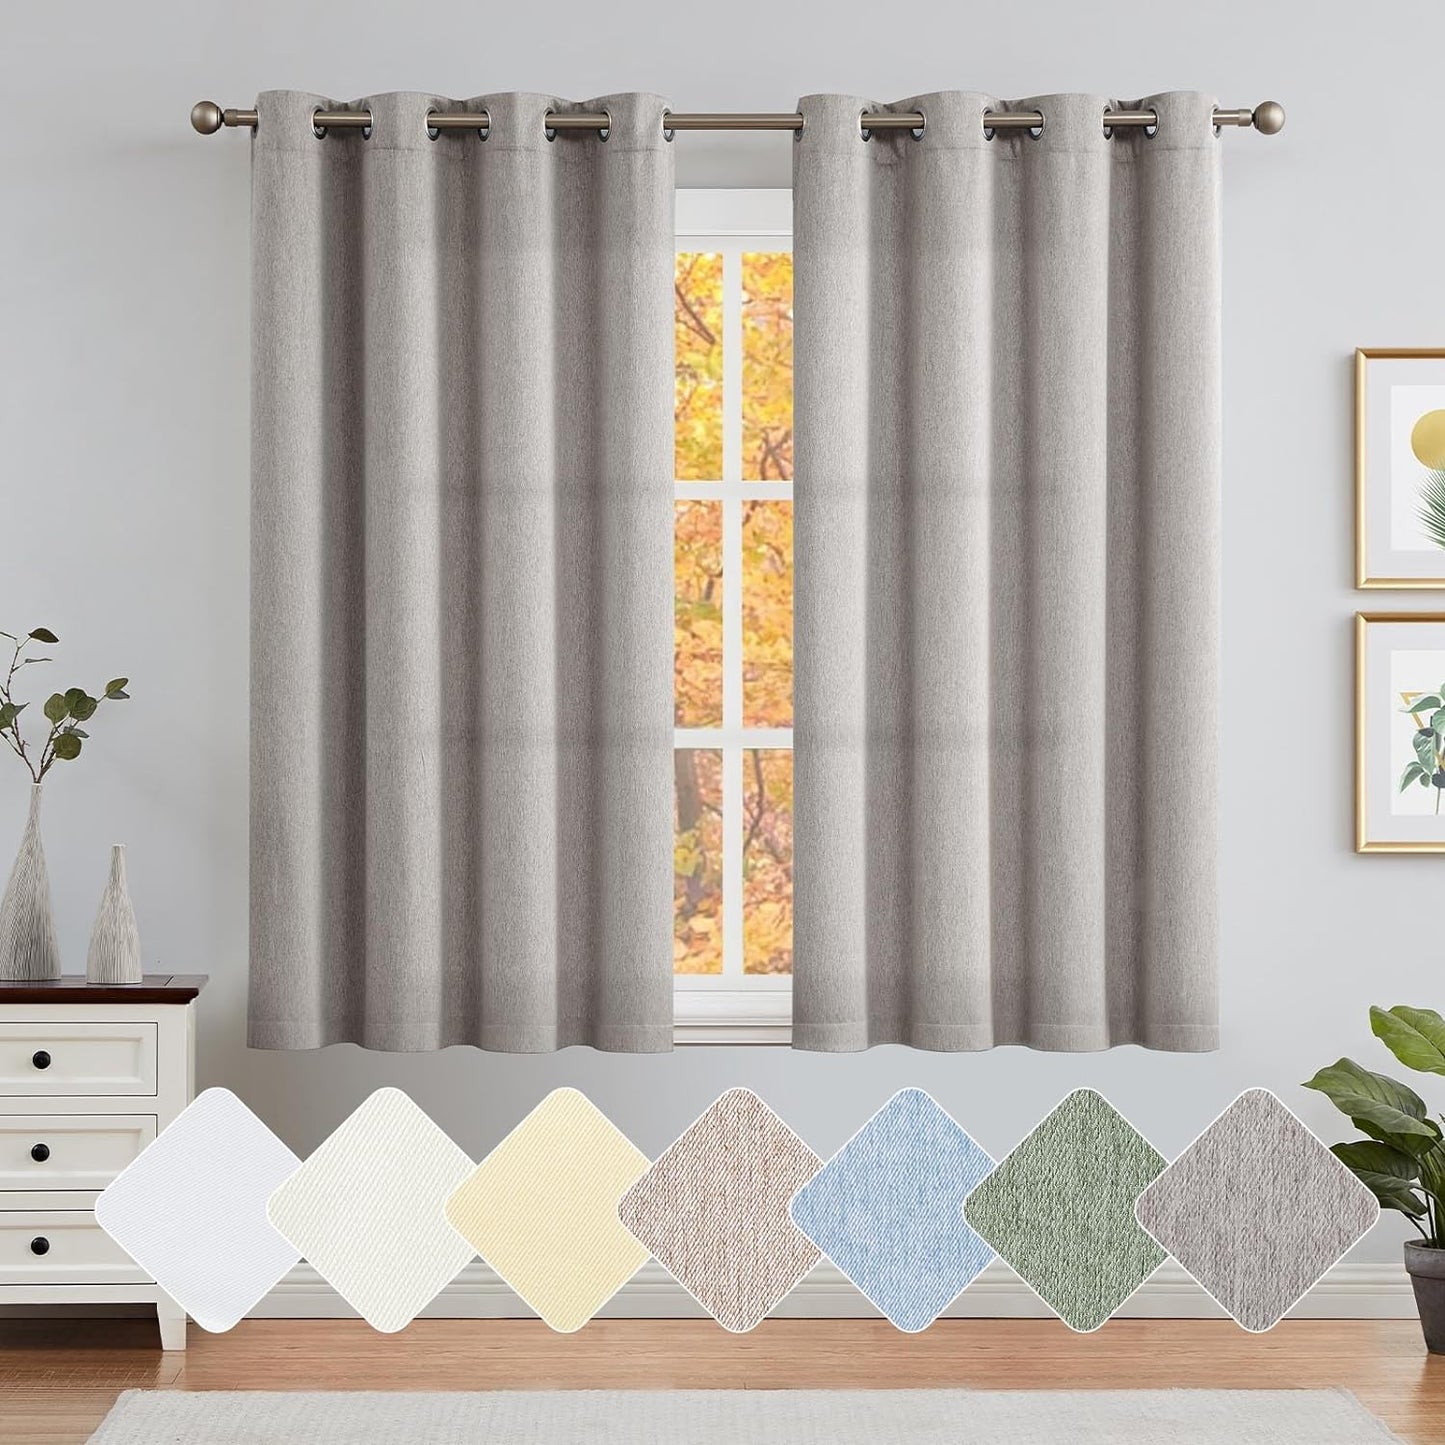 Jinchan Curtains for Bedroom Living Room 84 Inch Long Room Darkening Farmhouse Country Window Curtains Heathered Denim Blue Curtains Grommet Curtains Drapes 2 Panels  CKNY HOME FASHION *Grey 50"W X 63"L 